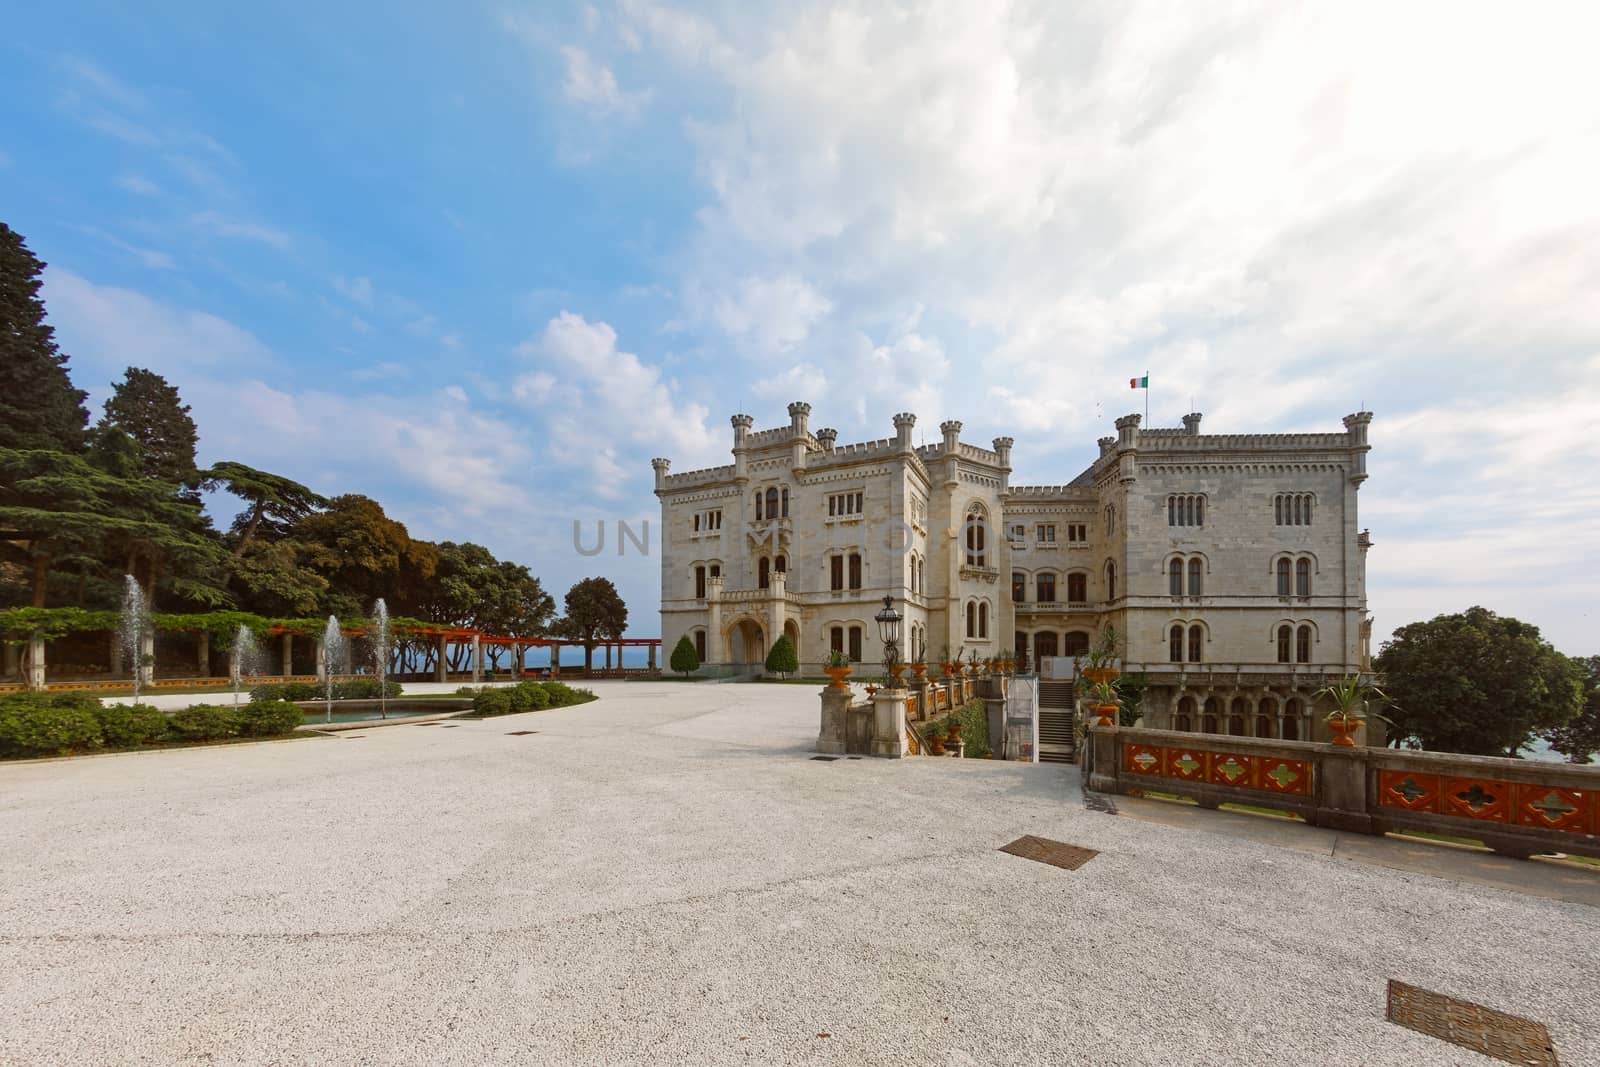 Castle on the shore near Trieste by svedoliver